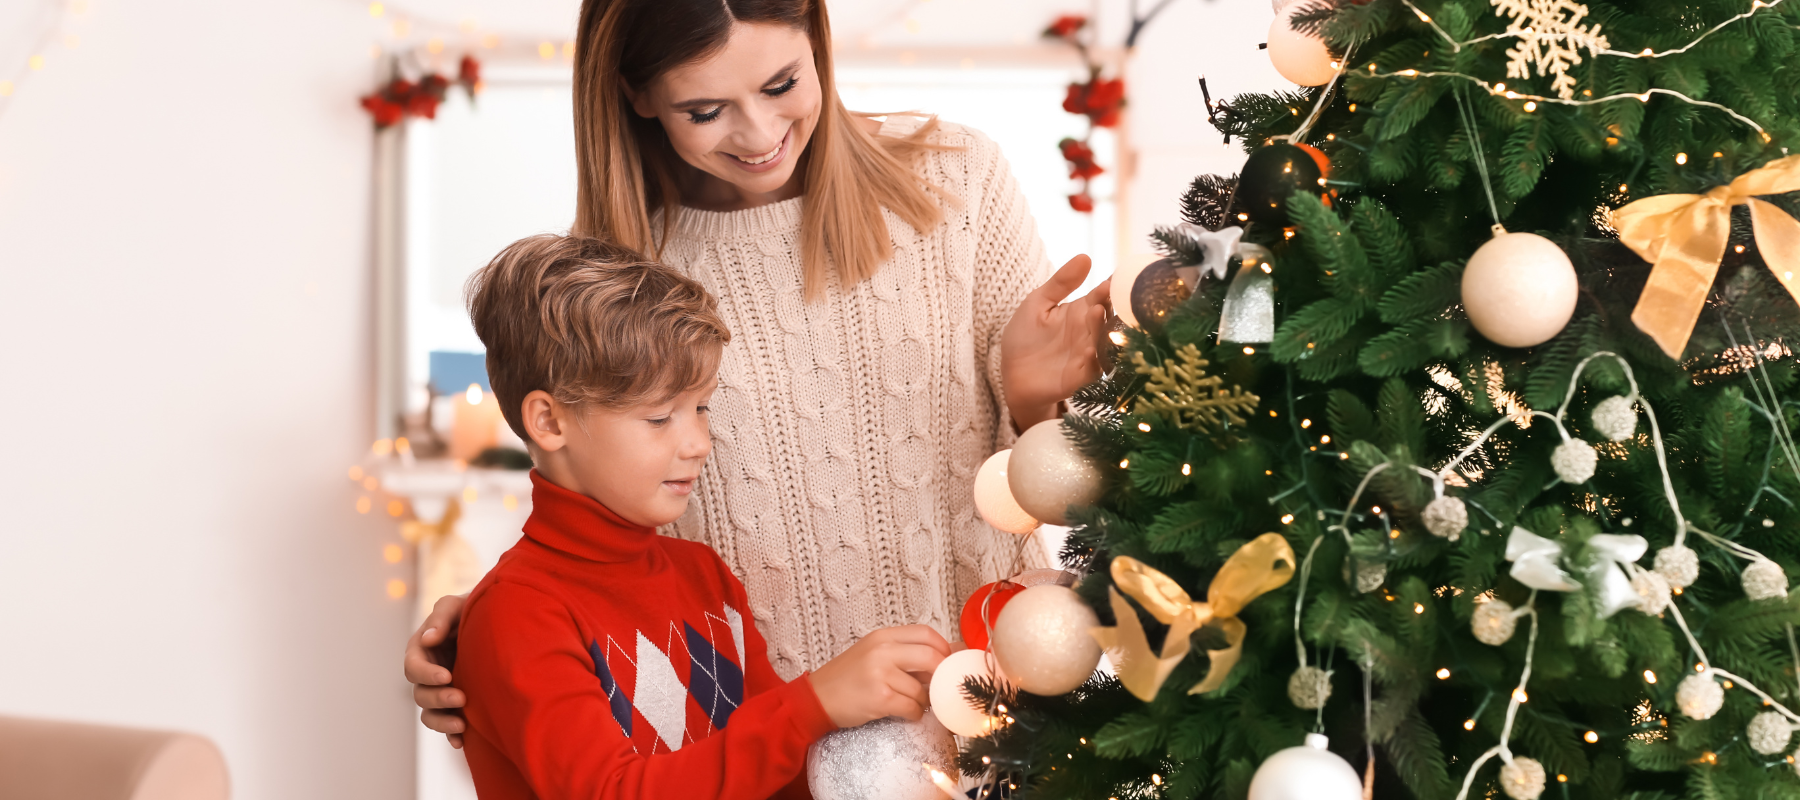 Why Do We Hang Ornaments On A Christmas Tree?